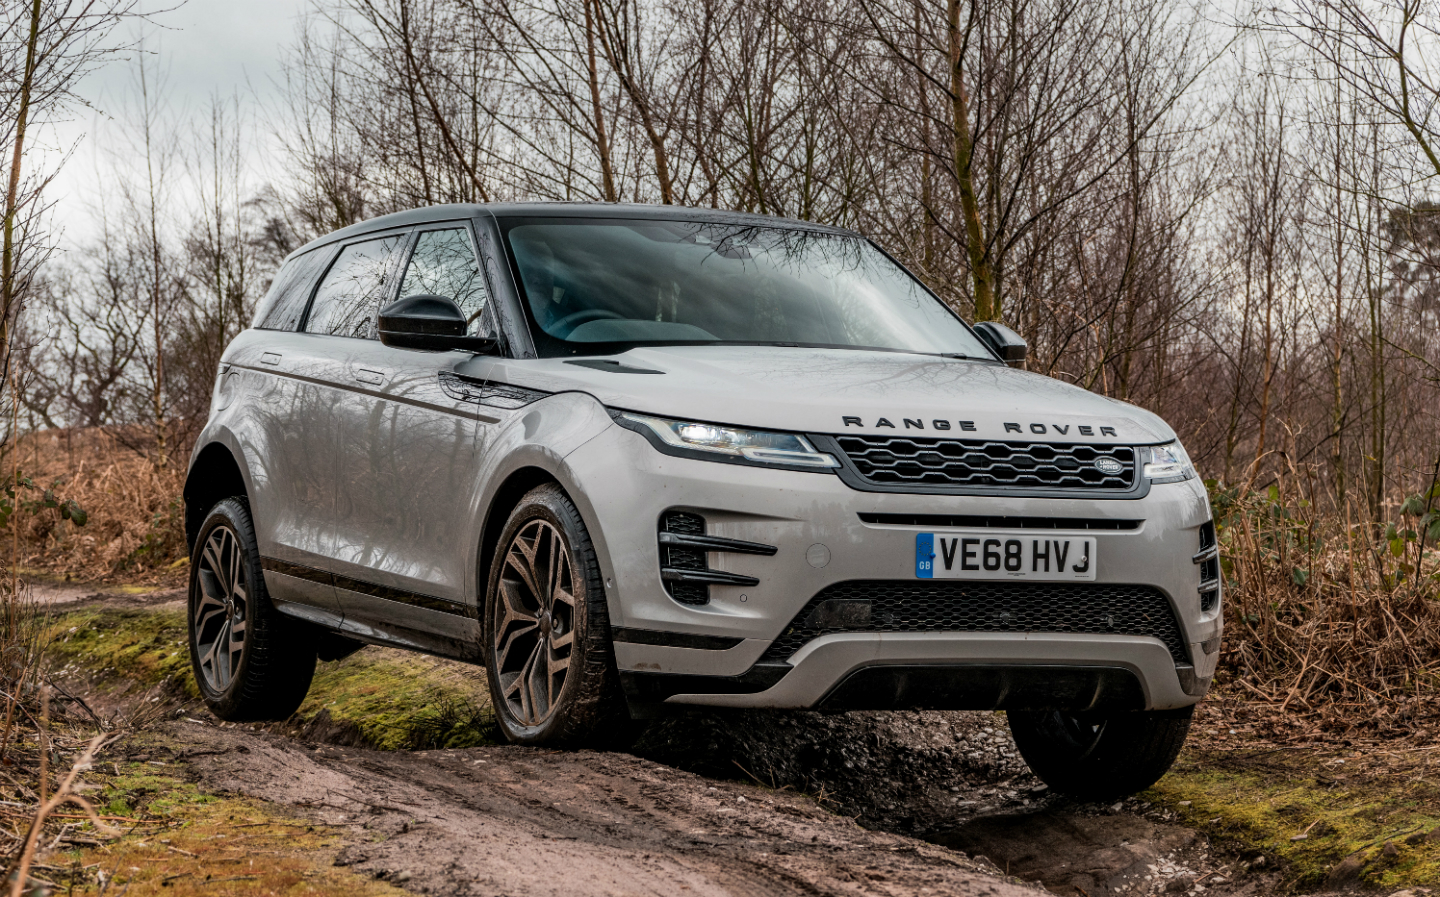 Motor Awards 2019: Best Family SUV of the Year nominees — vote now!